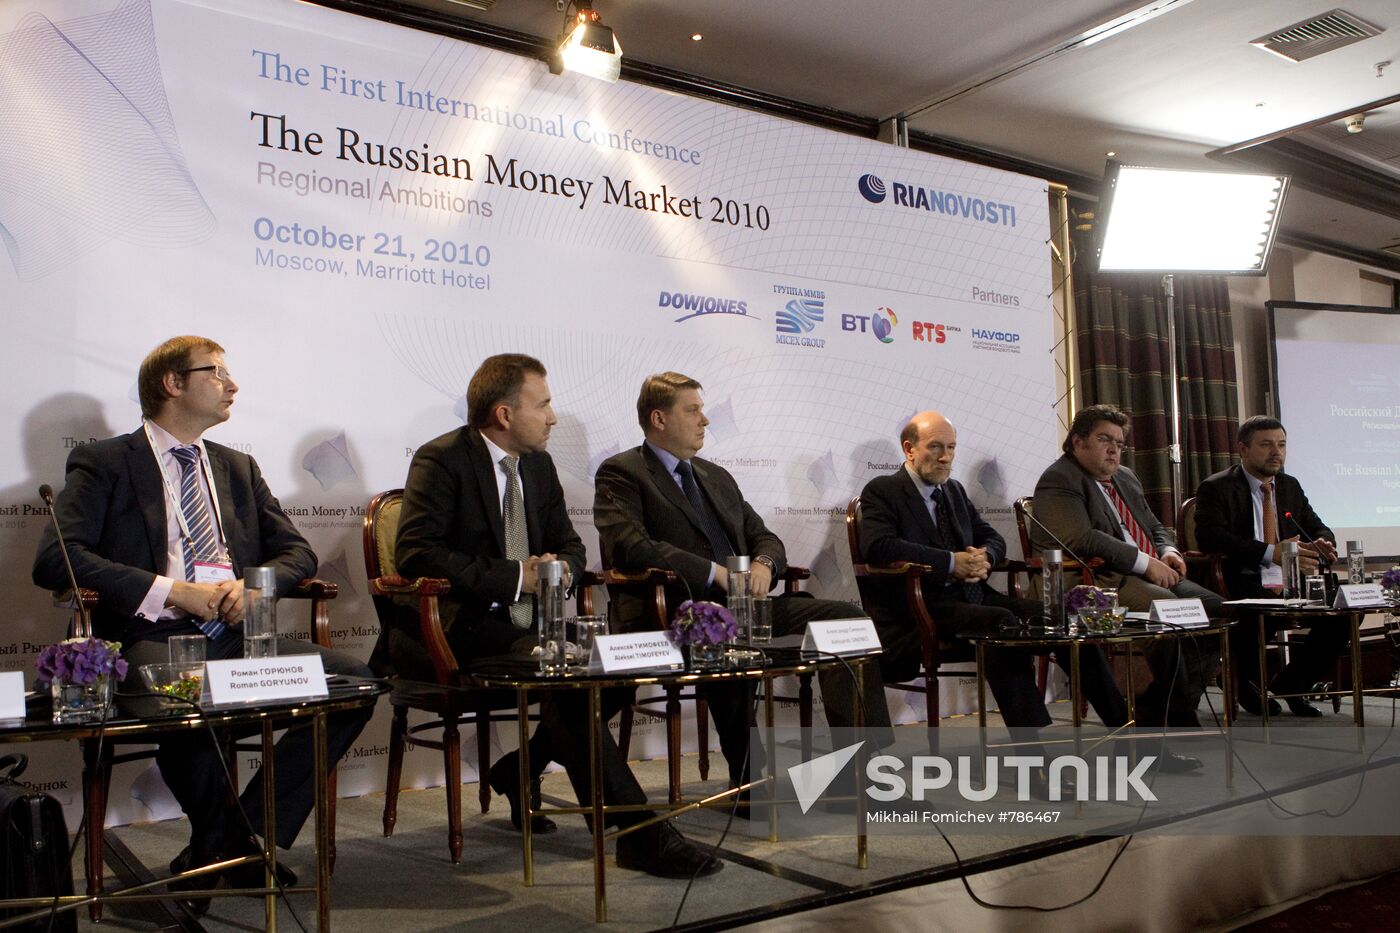 International conference "The Russian Money Market"